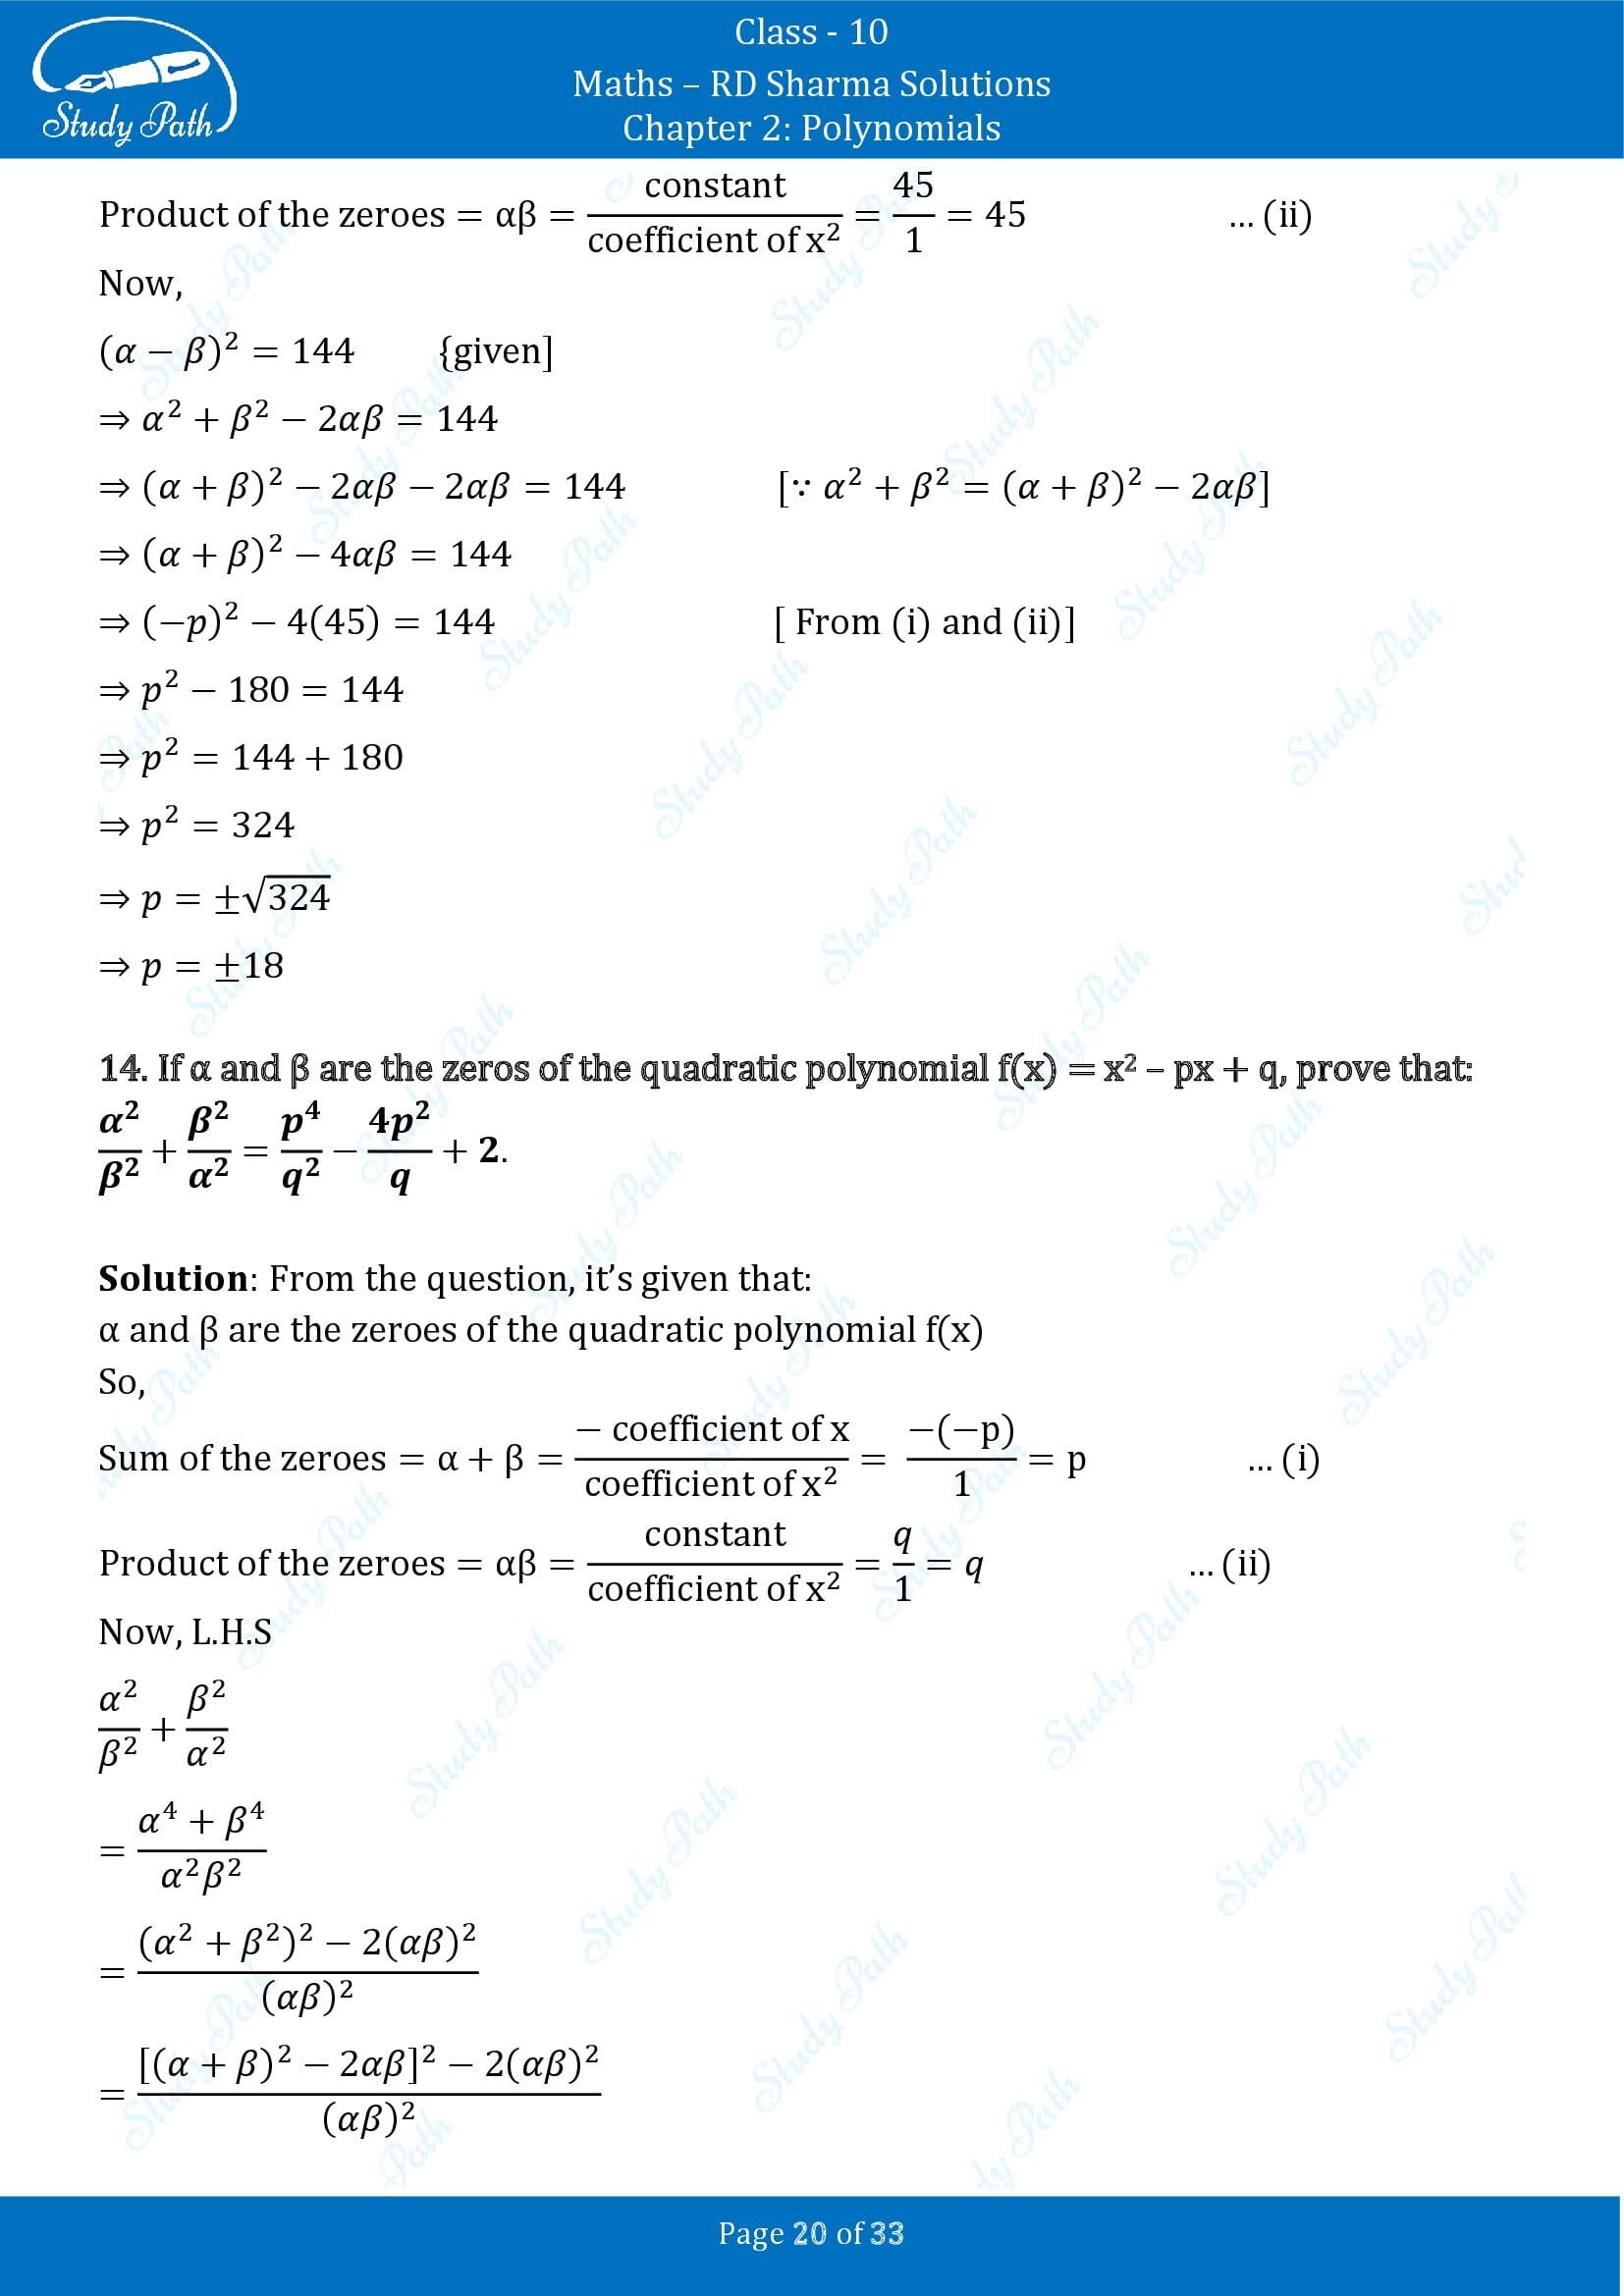 RD Sharma Solutions Class 10 Chapter 2 Polynomials Exercise 2.1 00020